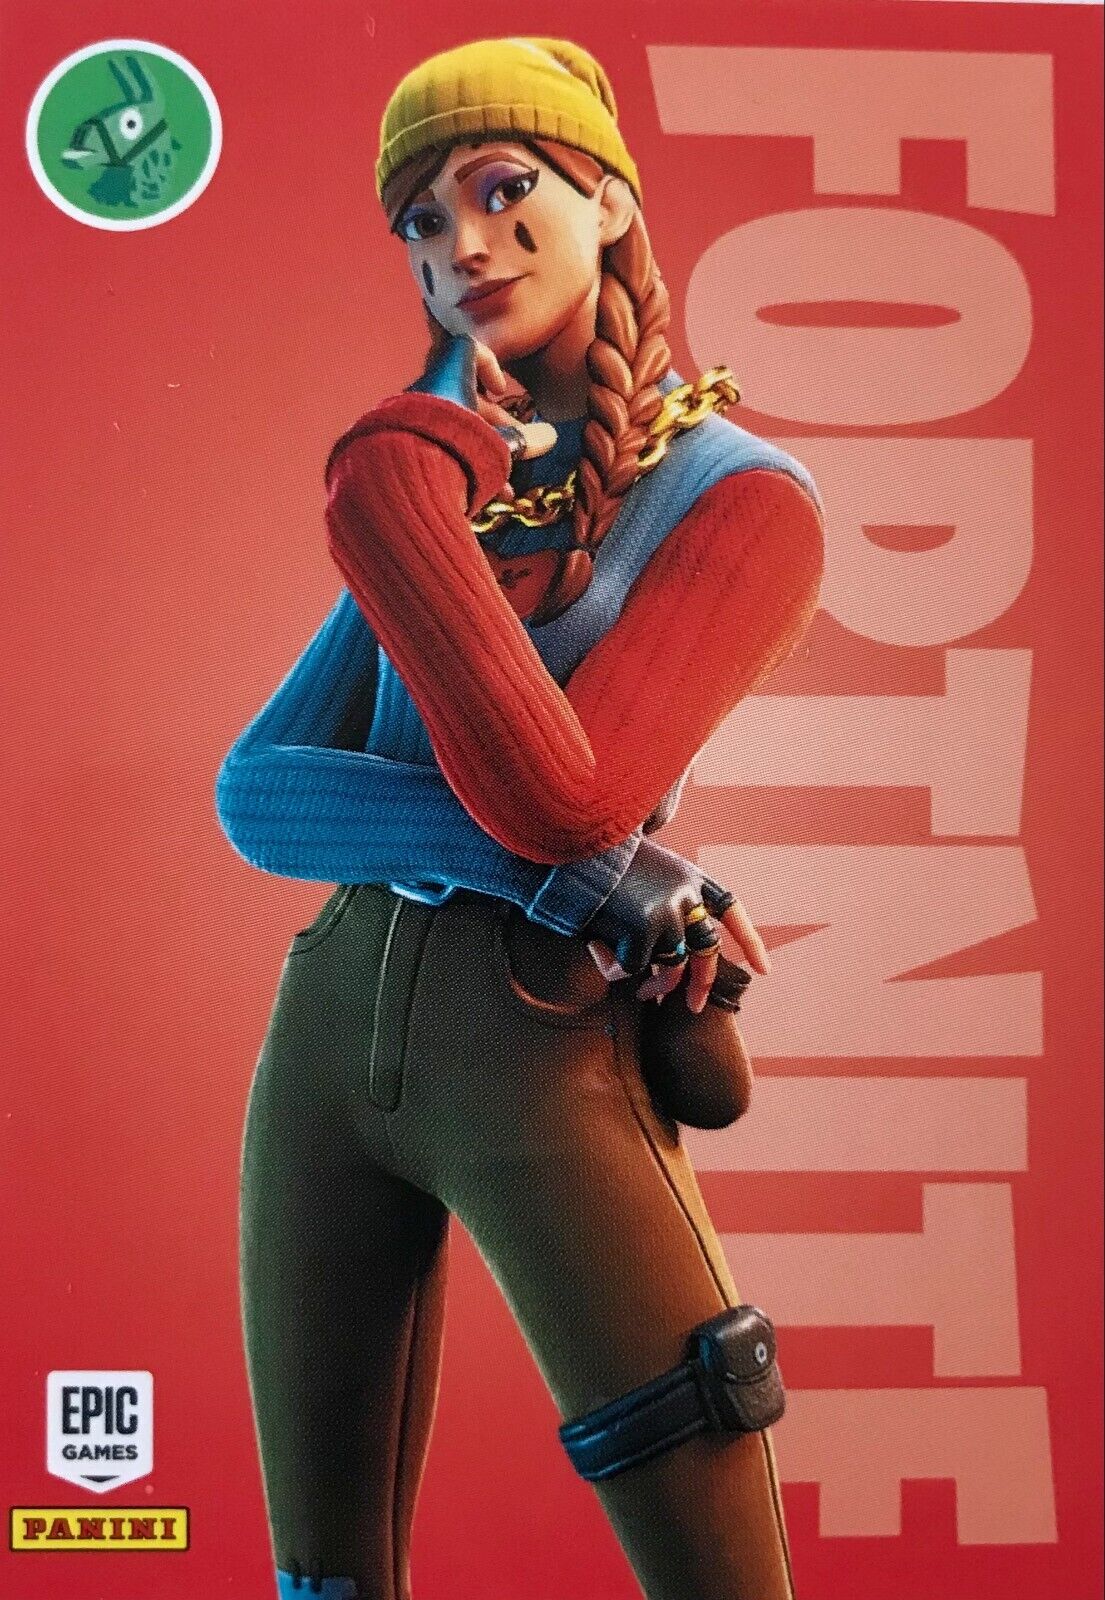 Panini Fortnite Series 3 Trading Cards - Base Cards #1 - 200 - Buy 4 get 10 Free